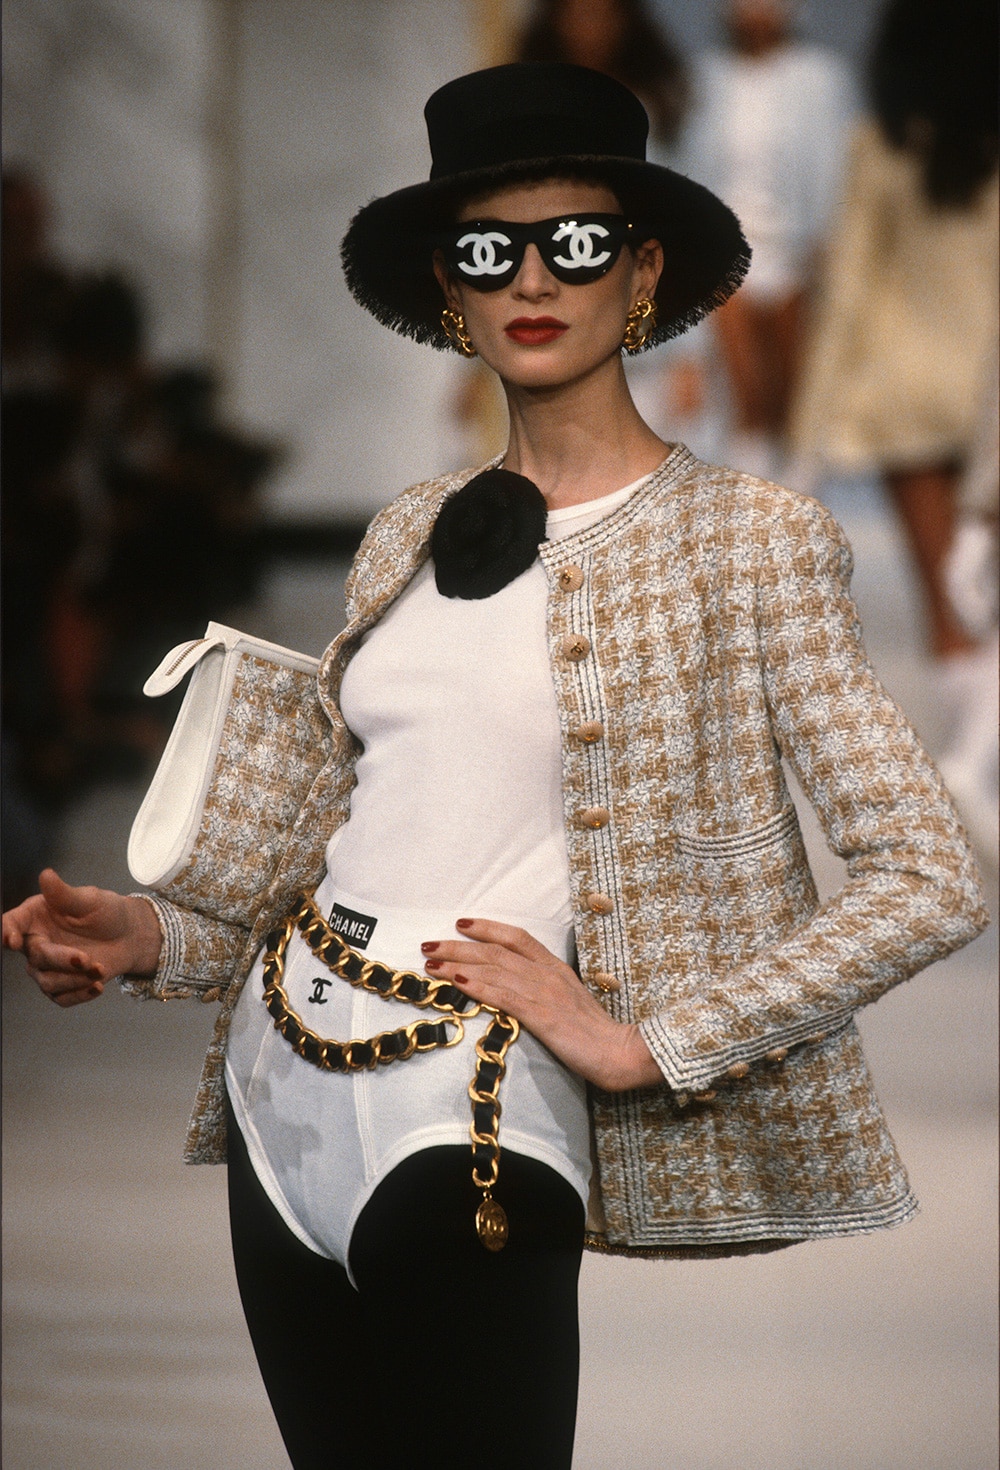 Coco Chanel simply chic  Vogue France